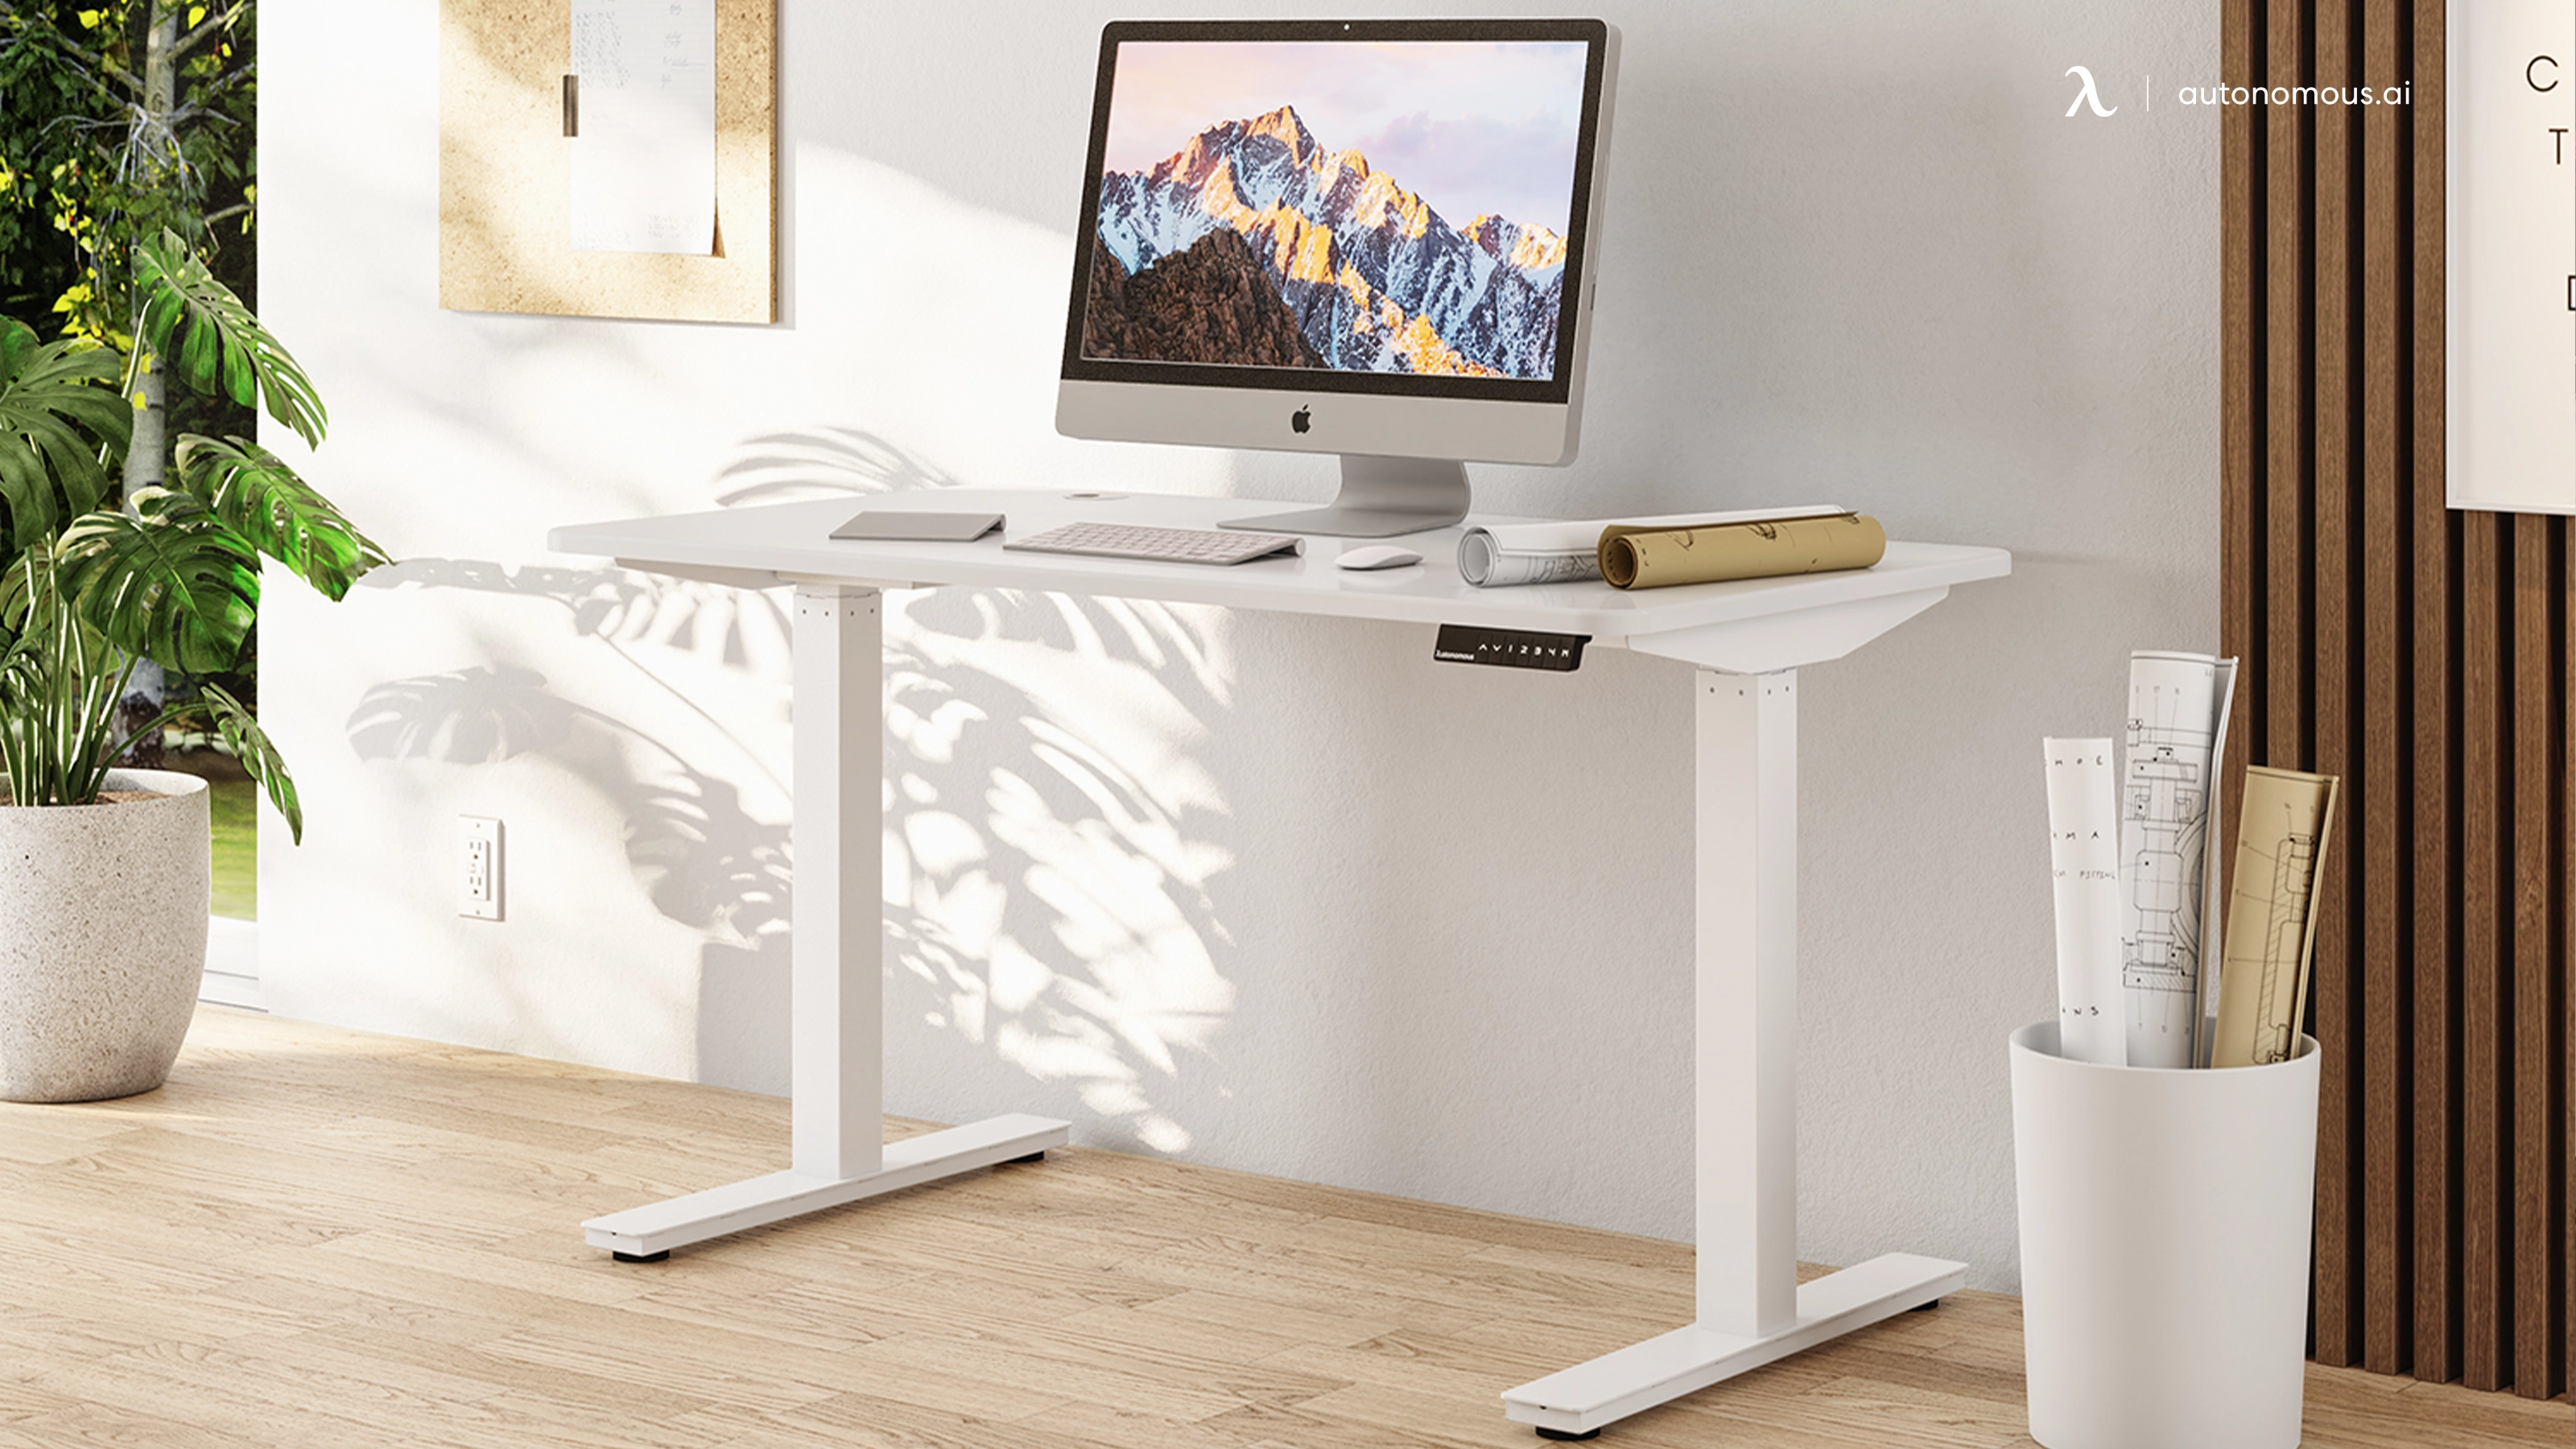 How Much Should You Spend on The Best Computer Desk?